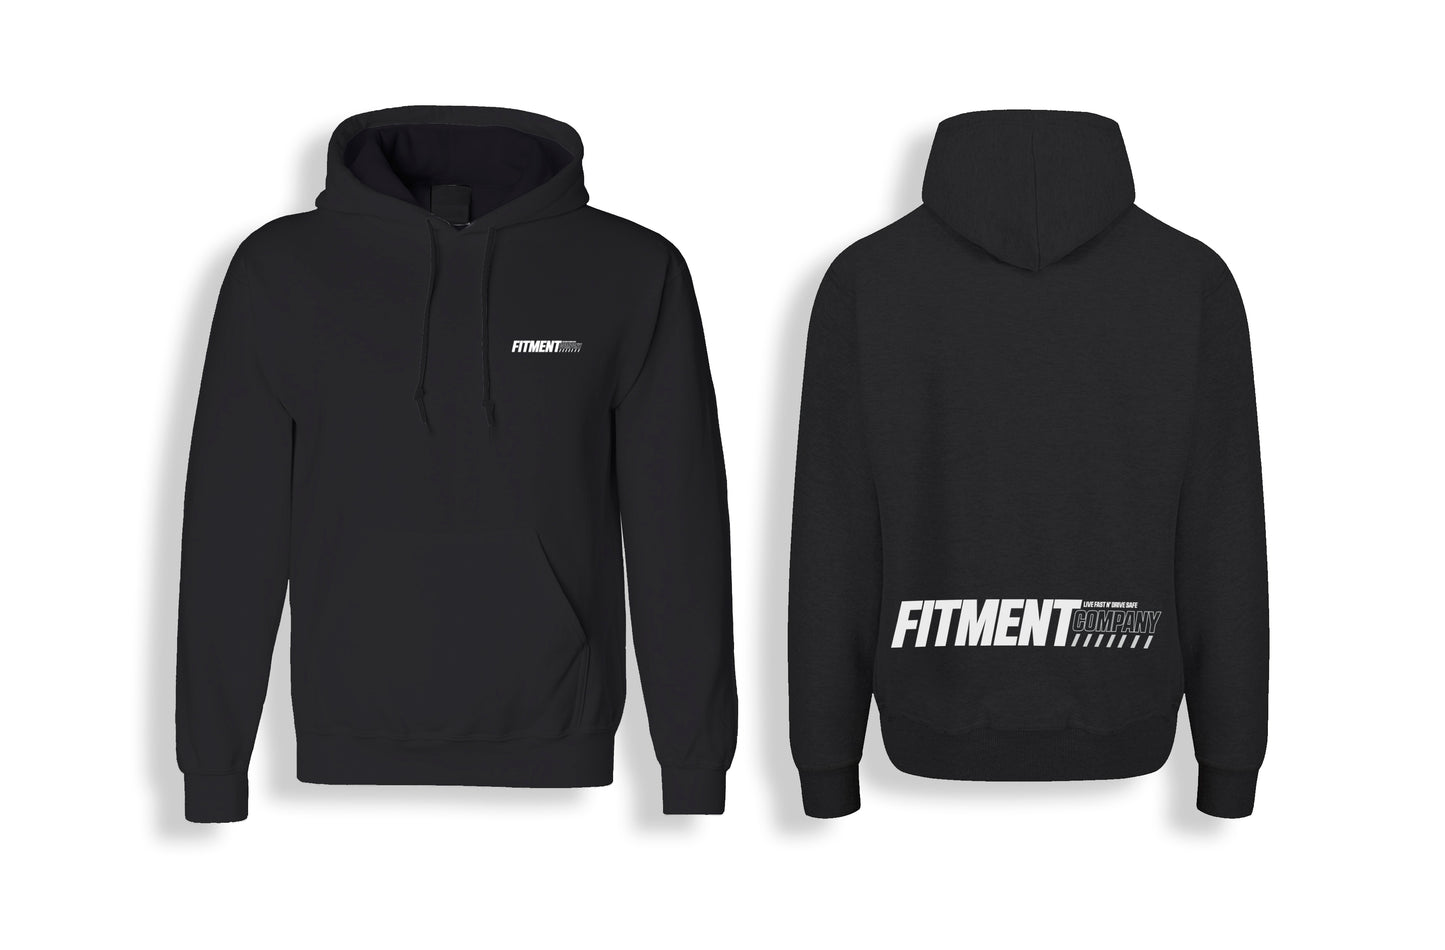 Fitment X Company Hoodie "Essentials"